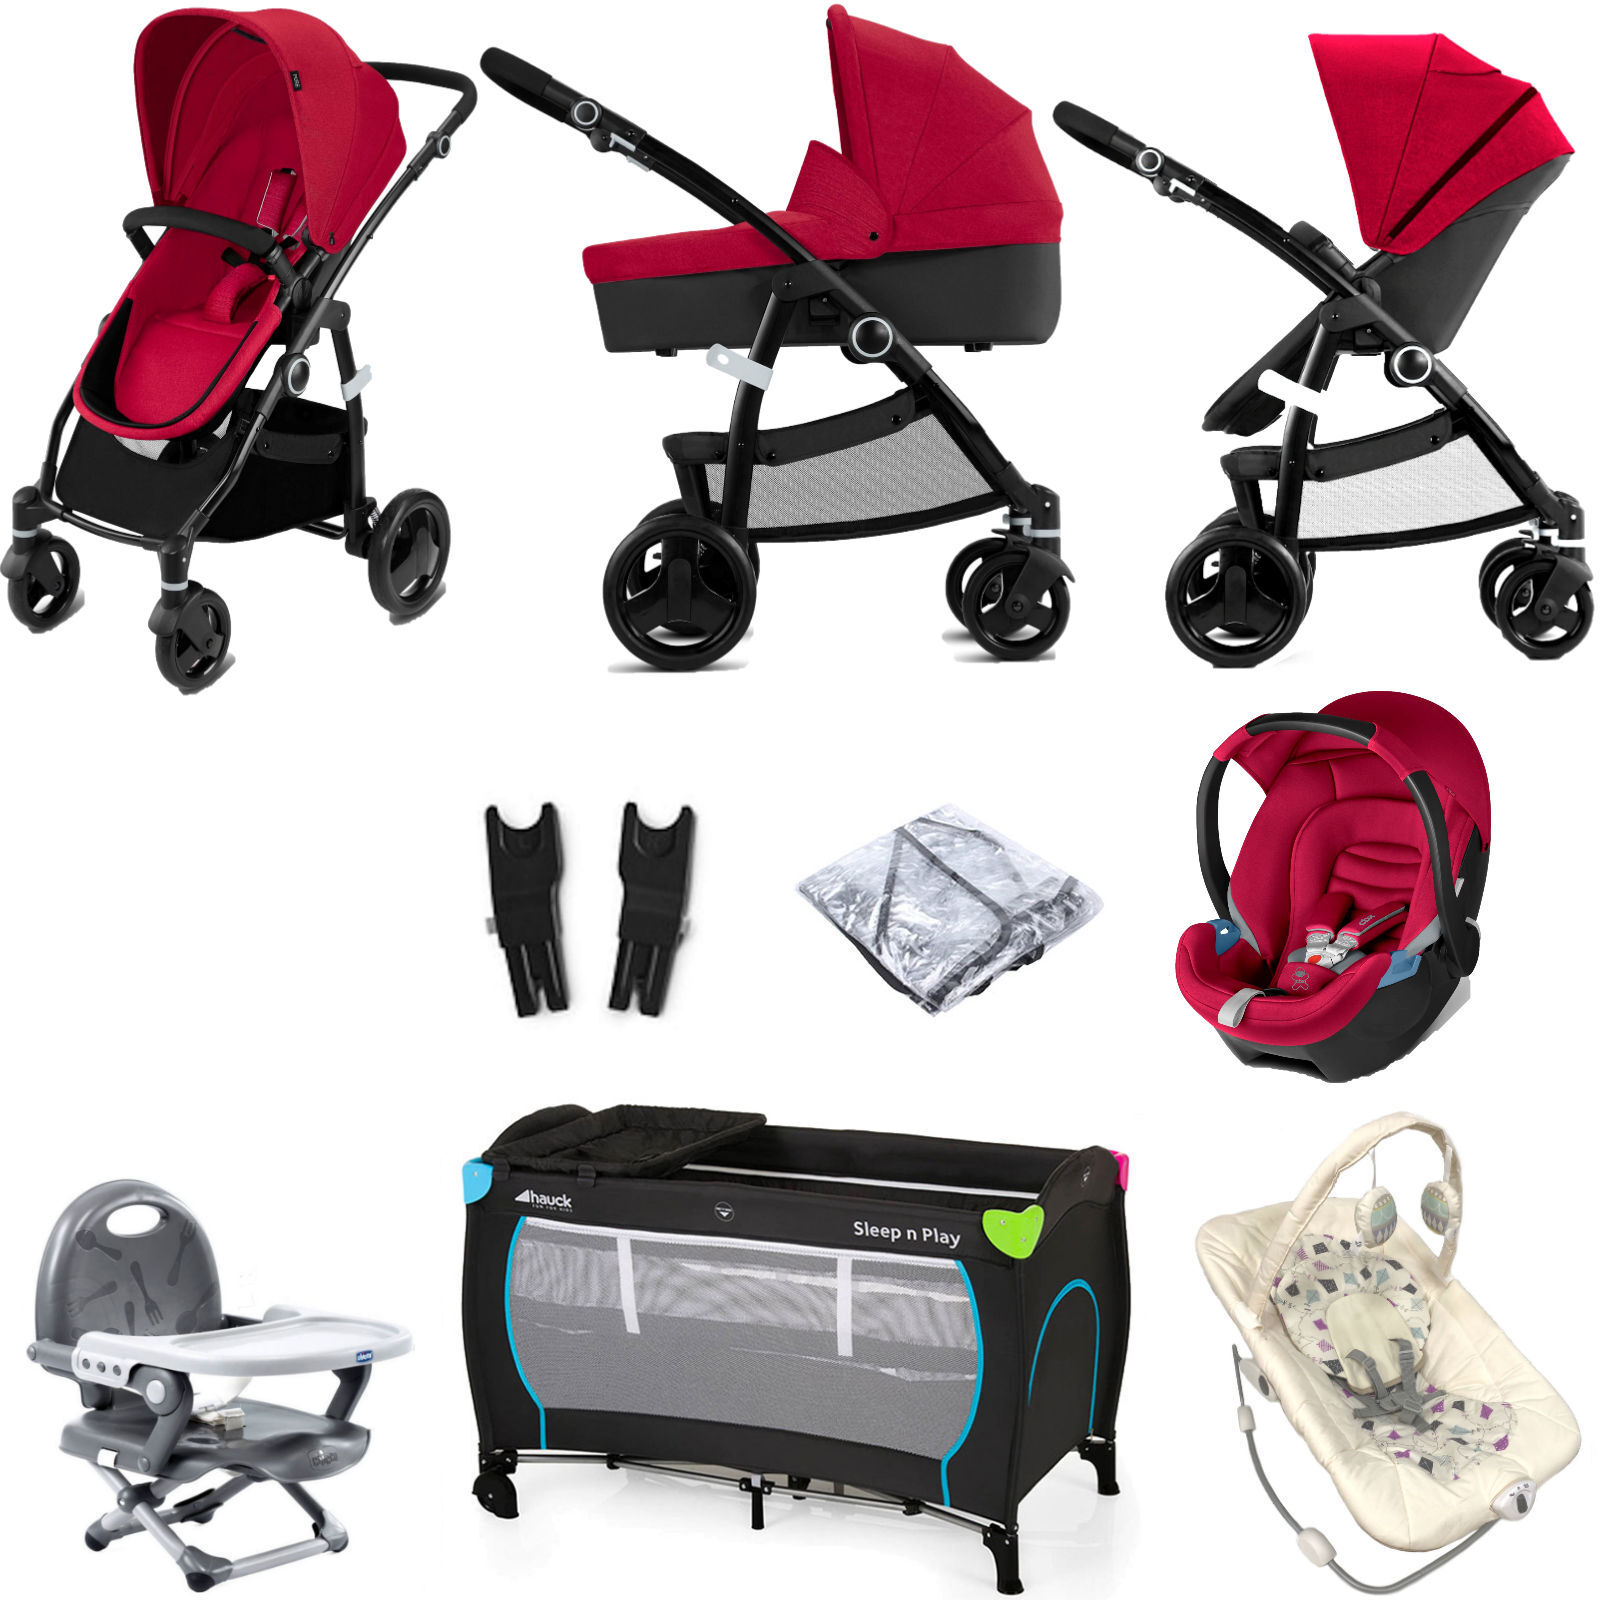 CBX Cybex CBX Leotie Pure (Aton) Everything You Need Travel System Bundle with Carrycot - Crunchy Red